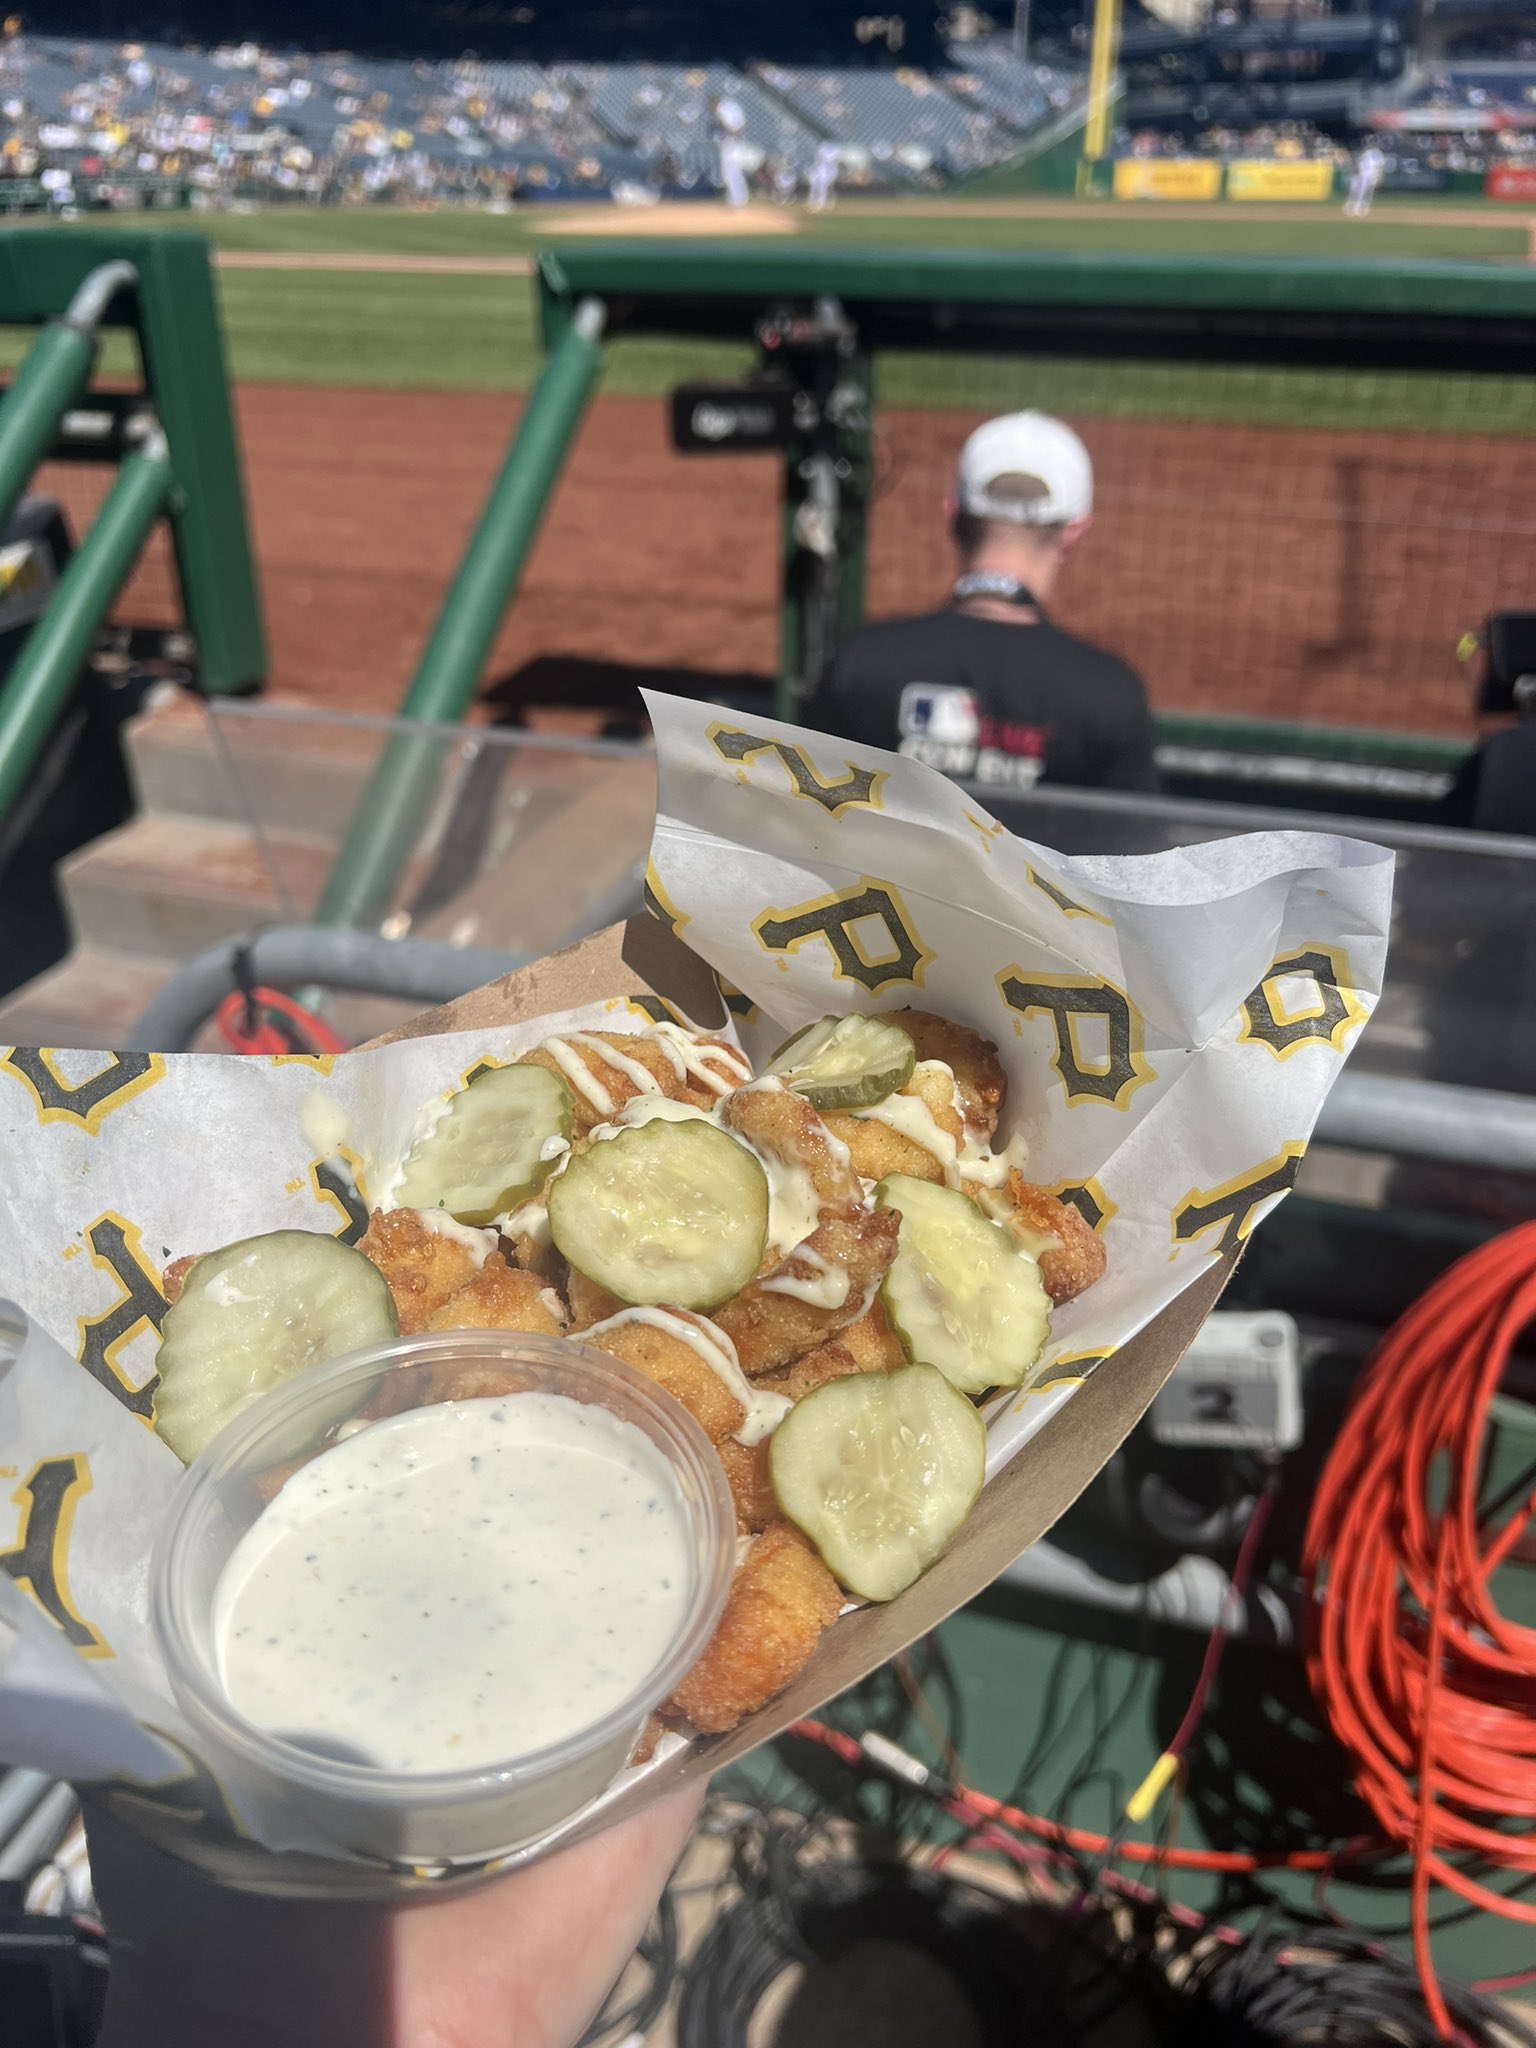 Julia Morales on X: Pickle curds available at PNC Park.